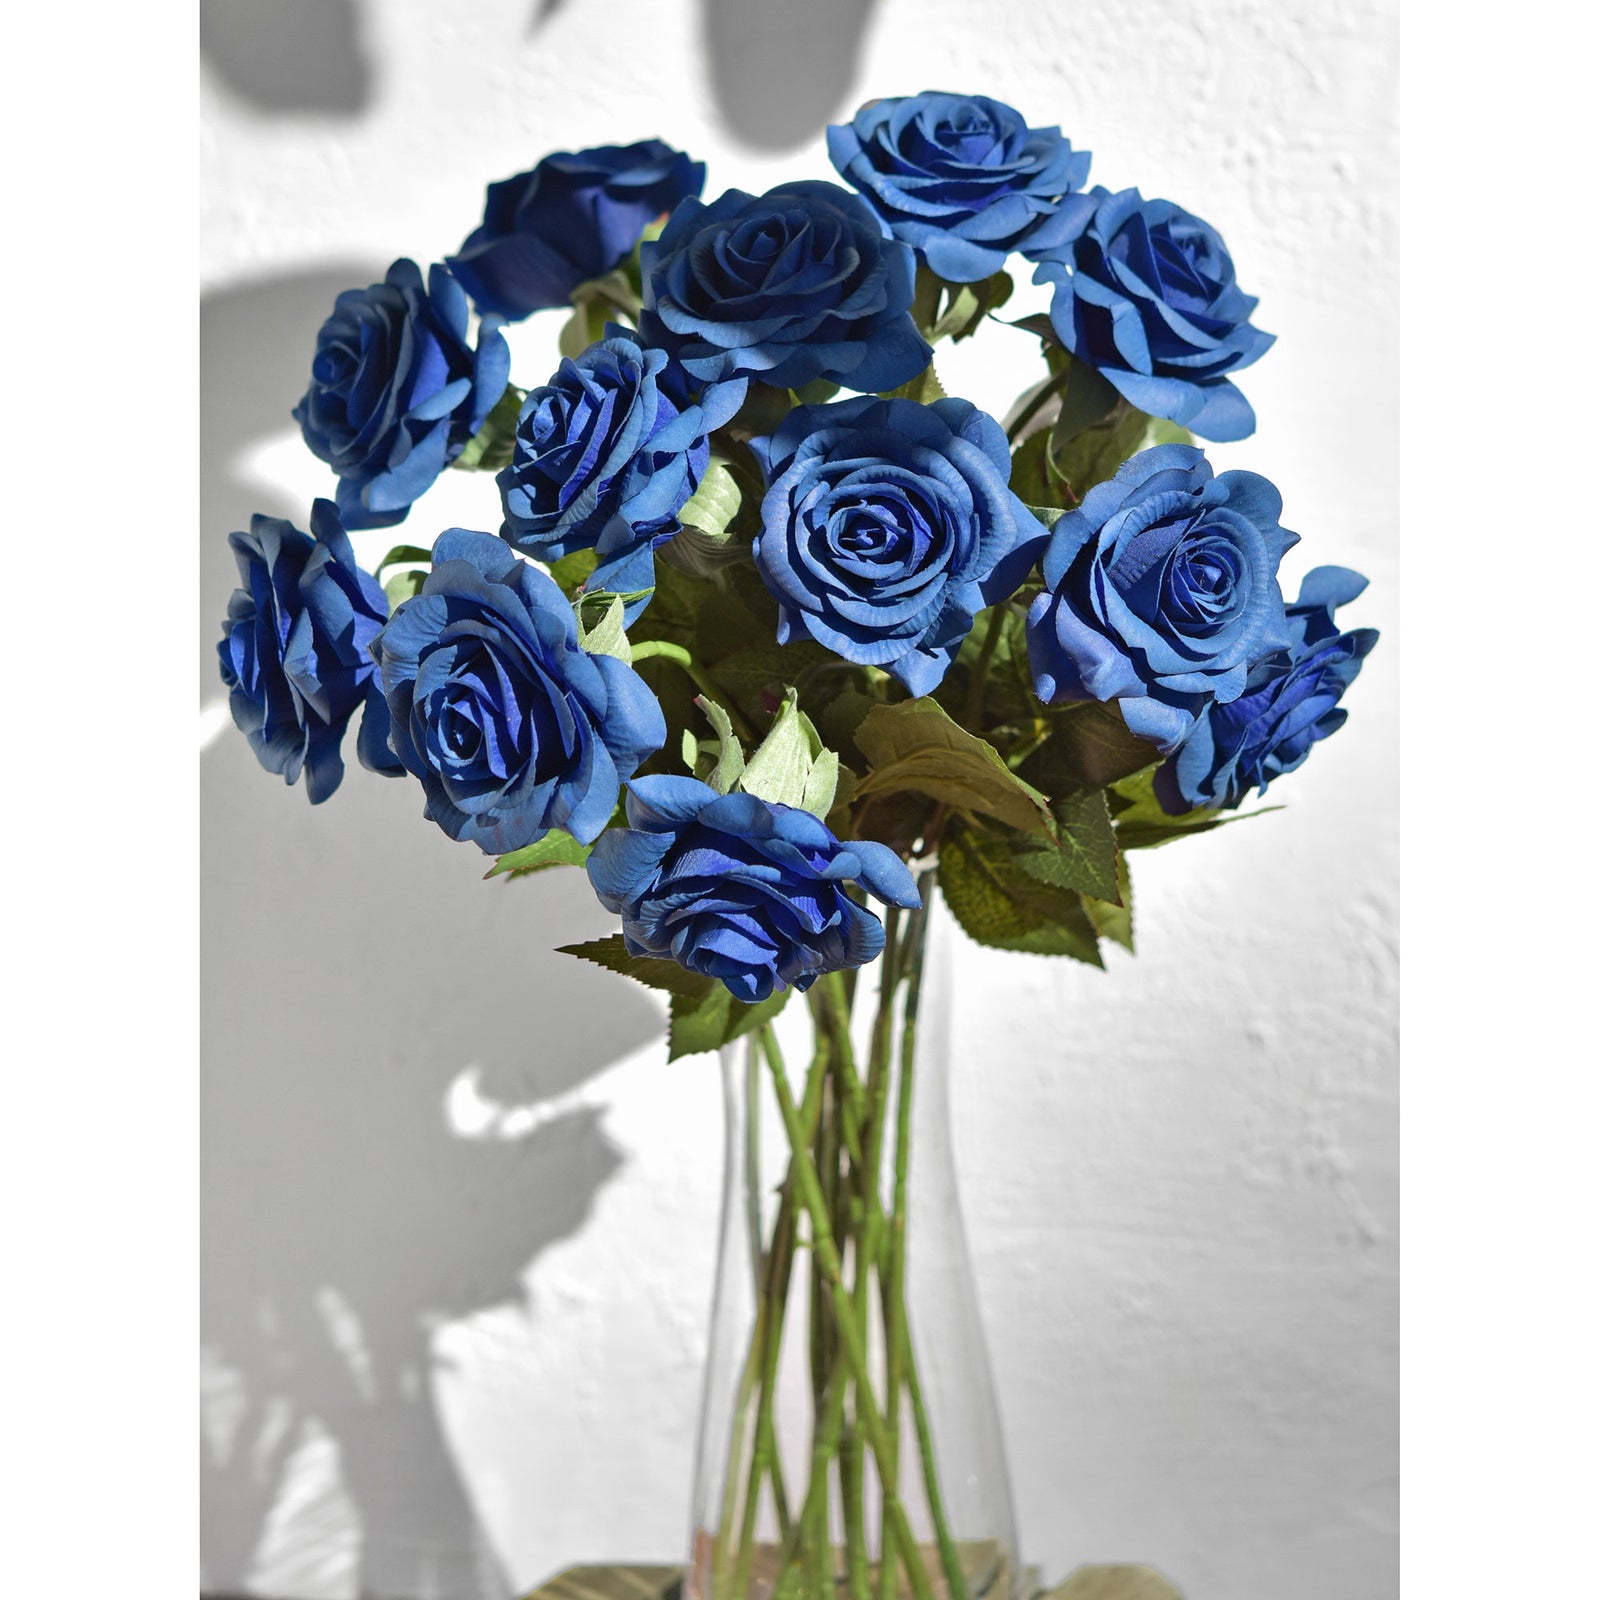 Real Touch 10 Stems Royal Blue Silk Artificial Roses Flowers ‘Petals Feel and Look like Fresh Roses'